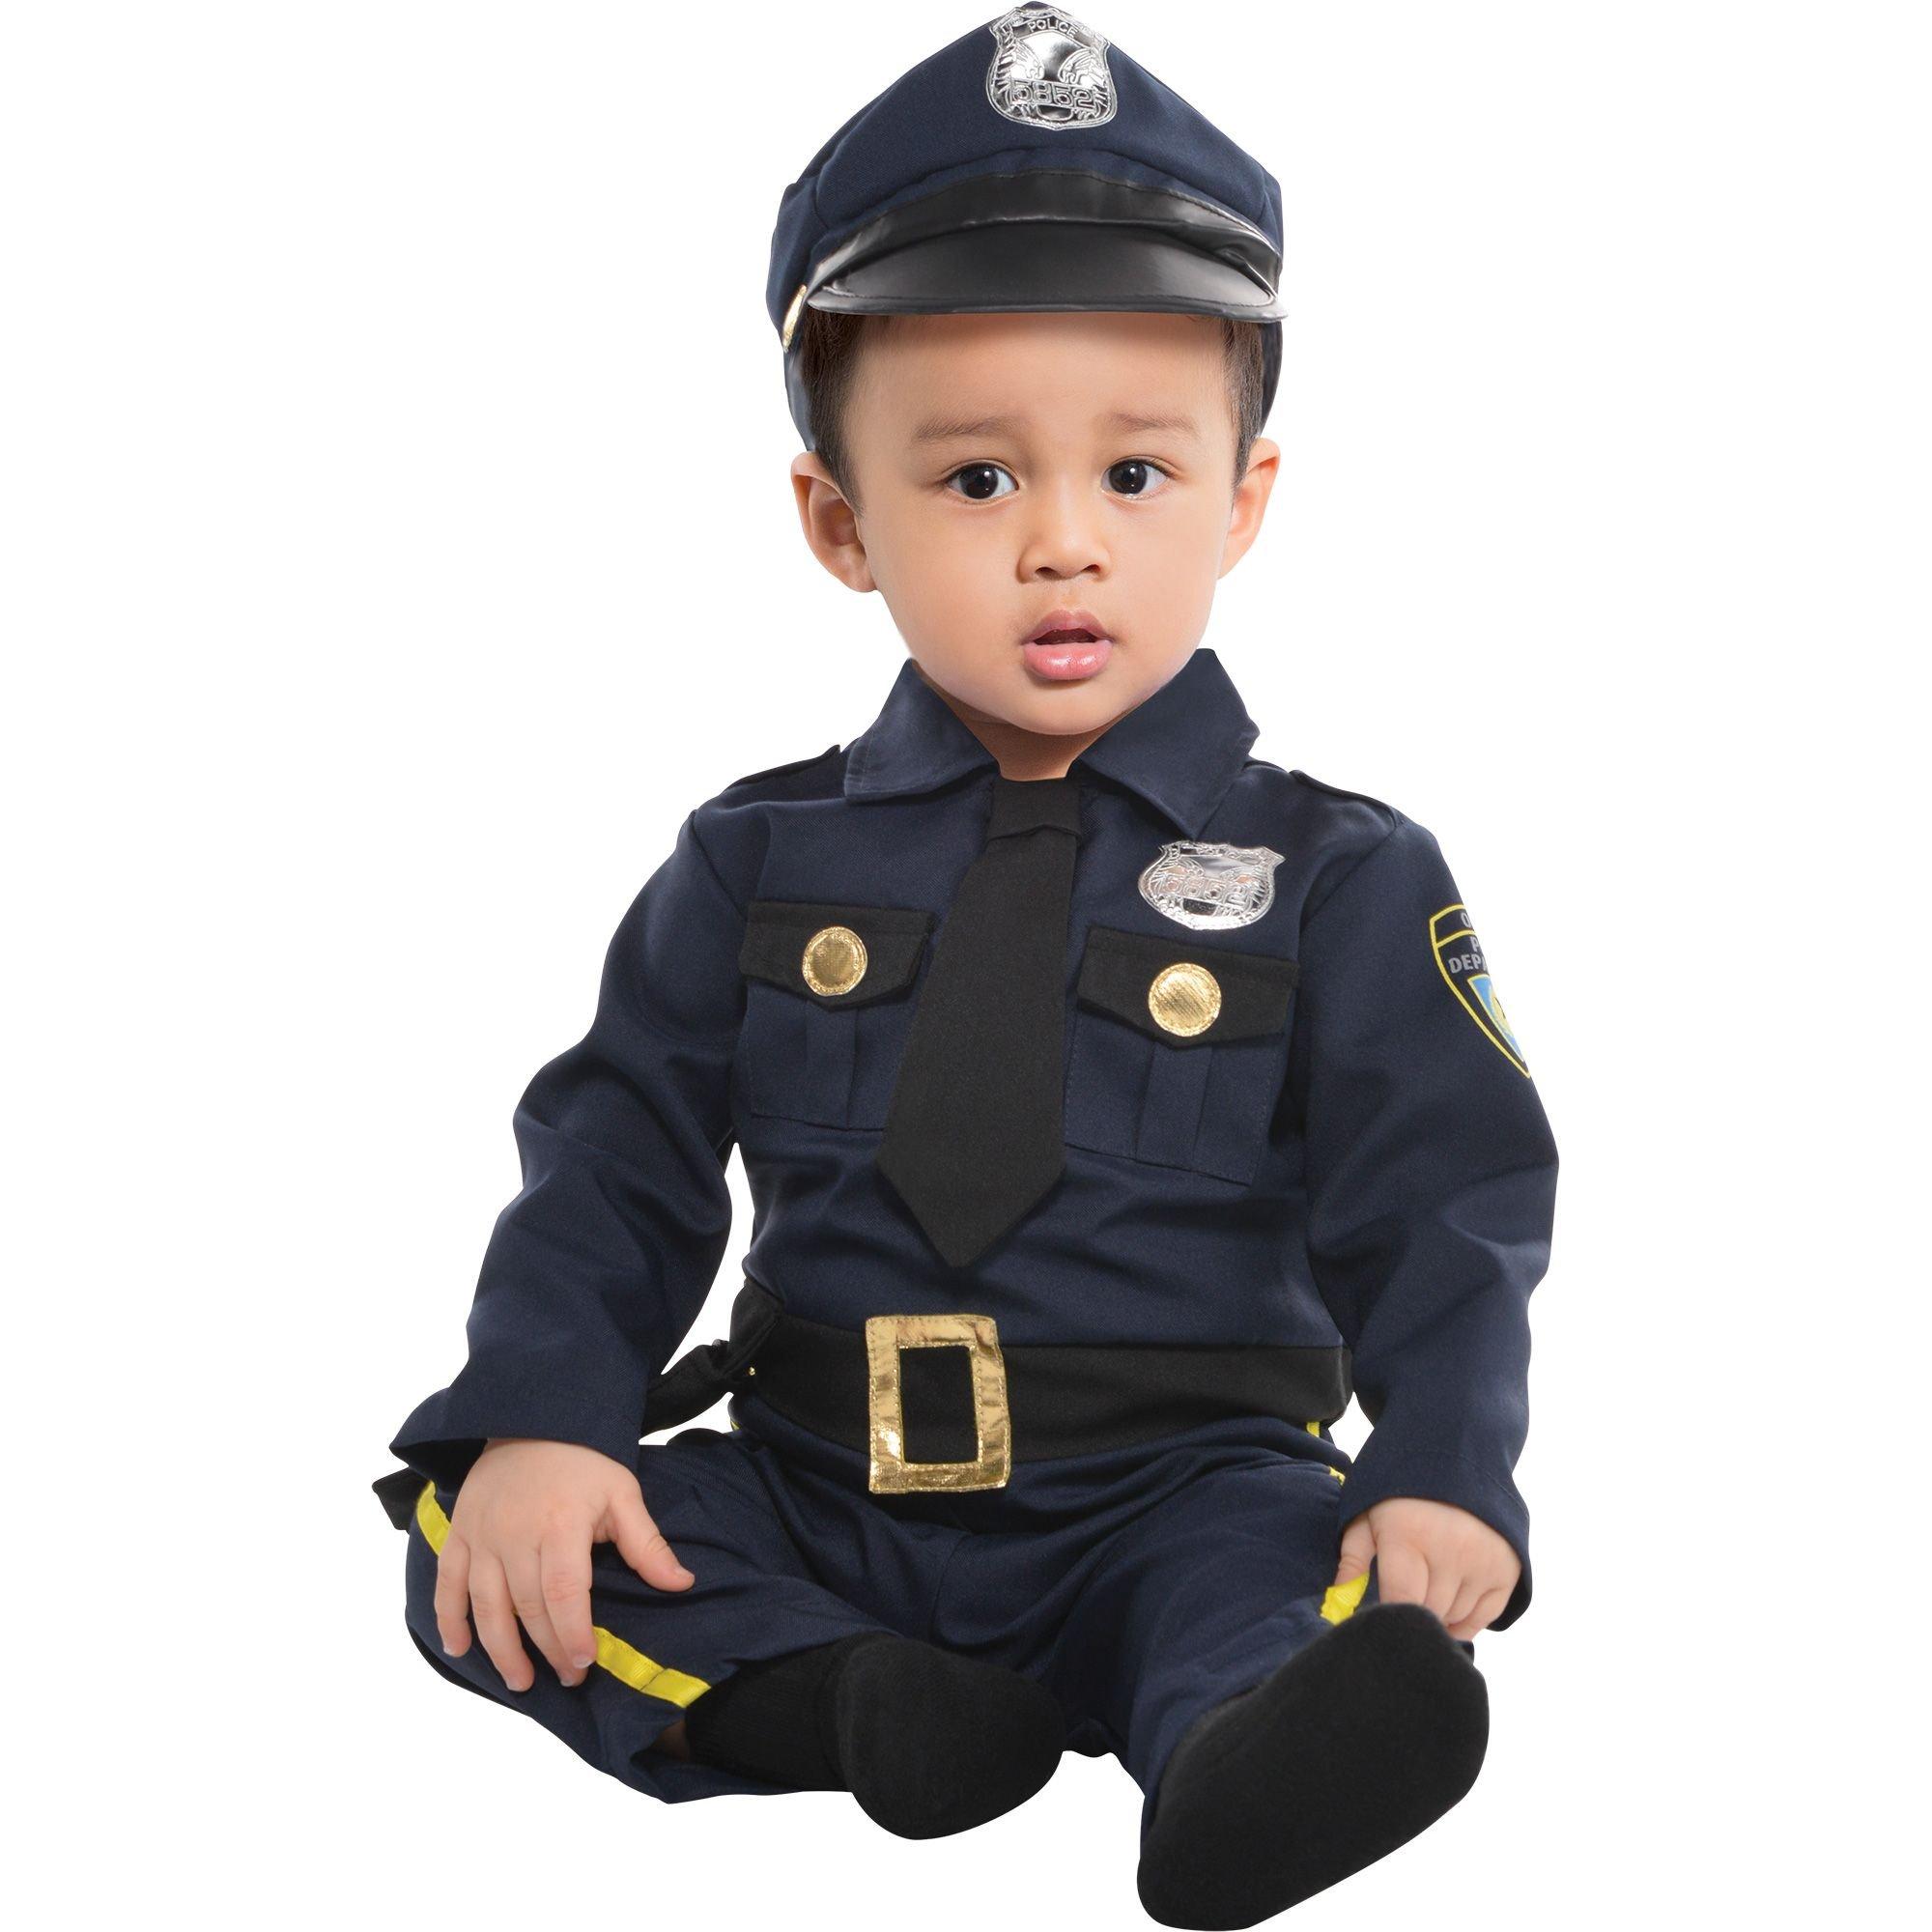 Police Officer Accessory Kit Kids Costume Multicoloured